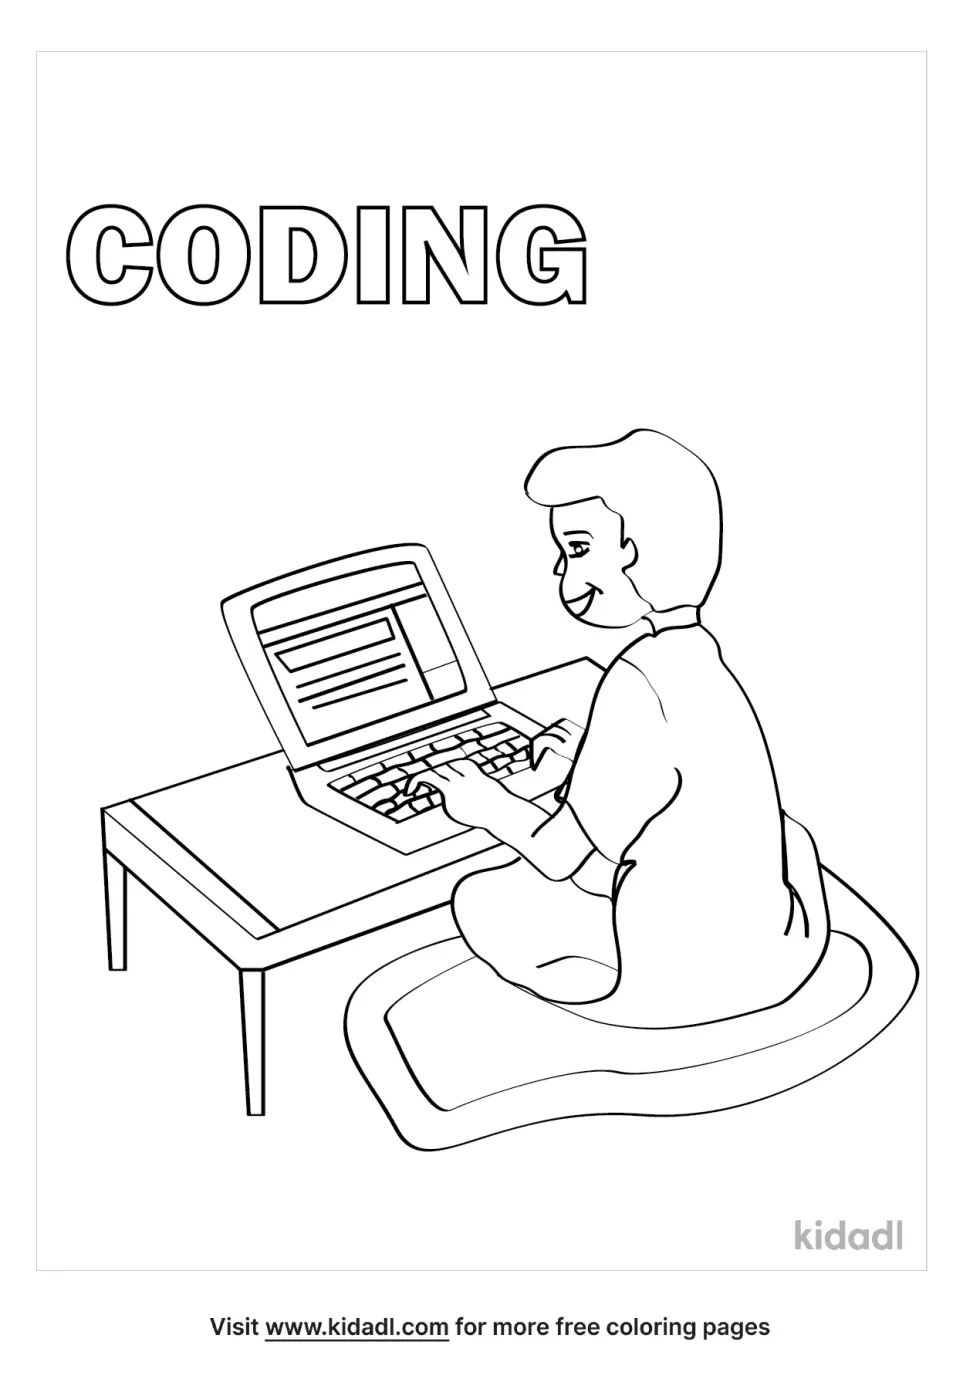 Coding Coloring Page